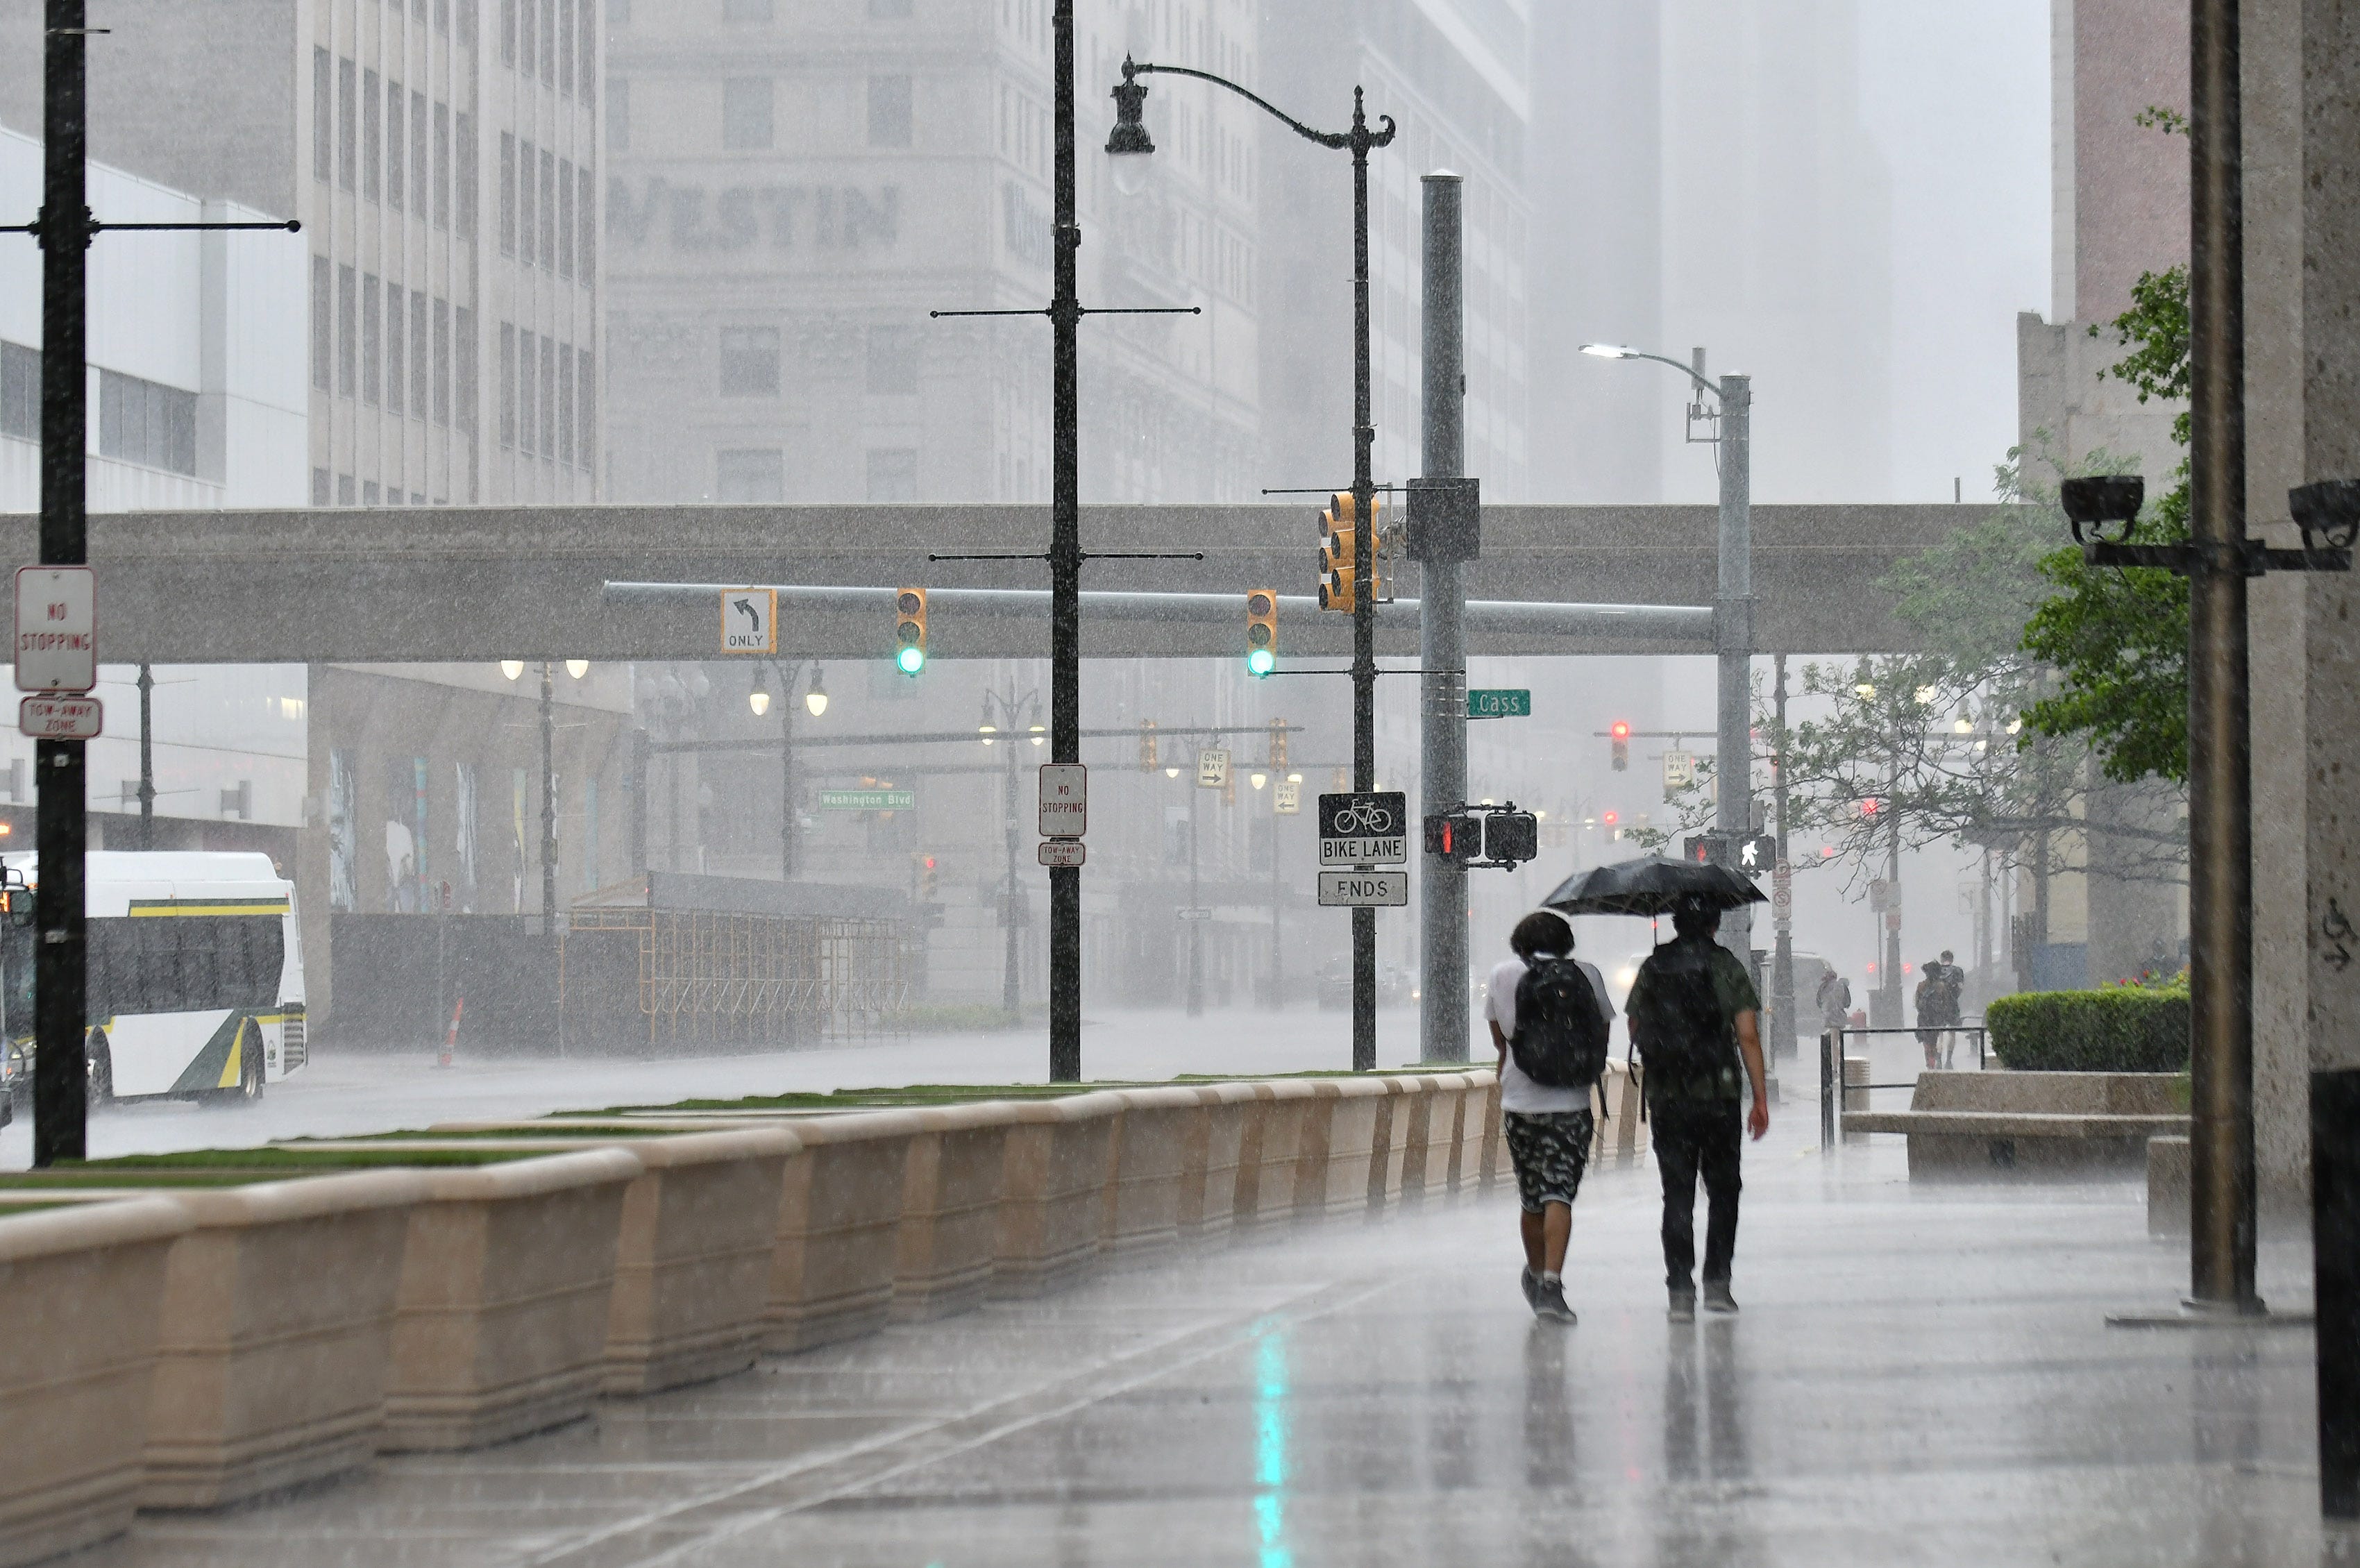 Protesters walk in the rain sheltered by an umbrella down Michigan Avenue after the march against police brutality in Detroit on June 10, 2020. This is the 13th day of protesting in Detroit.